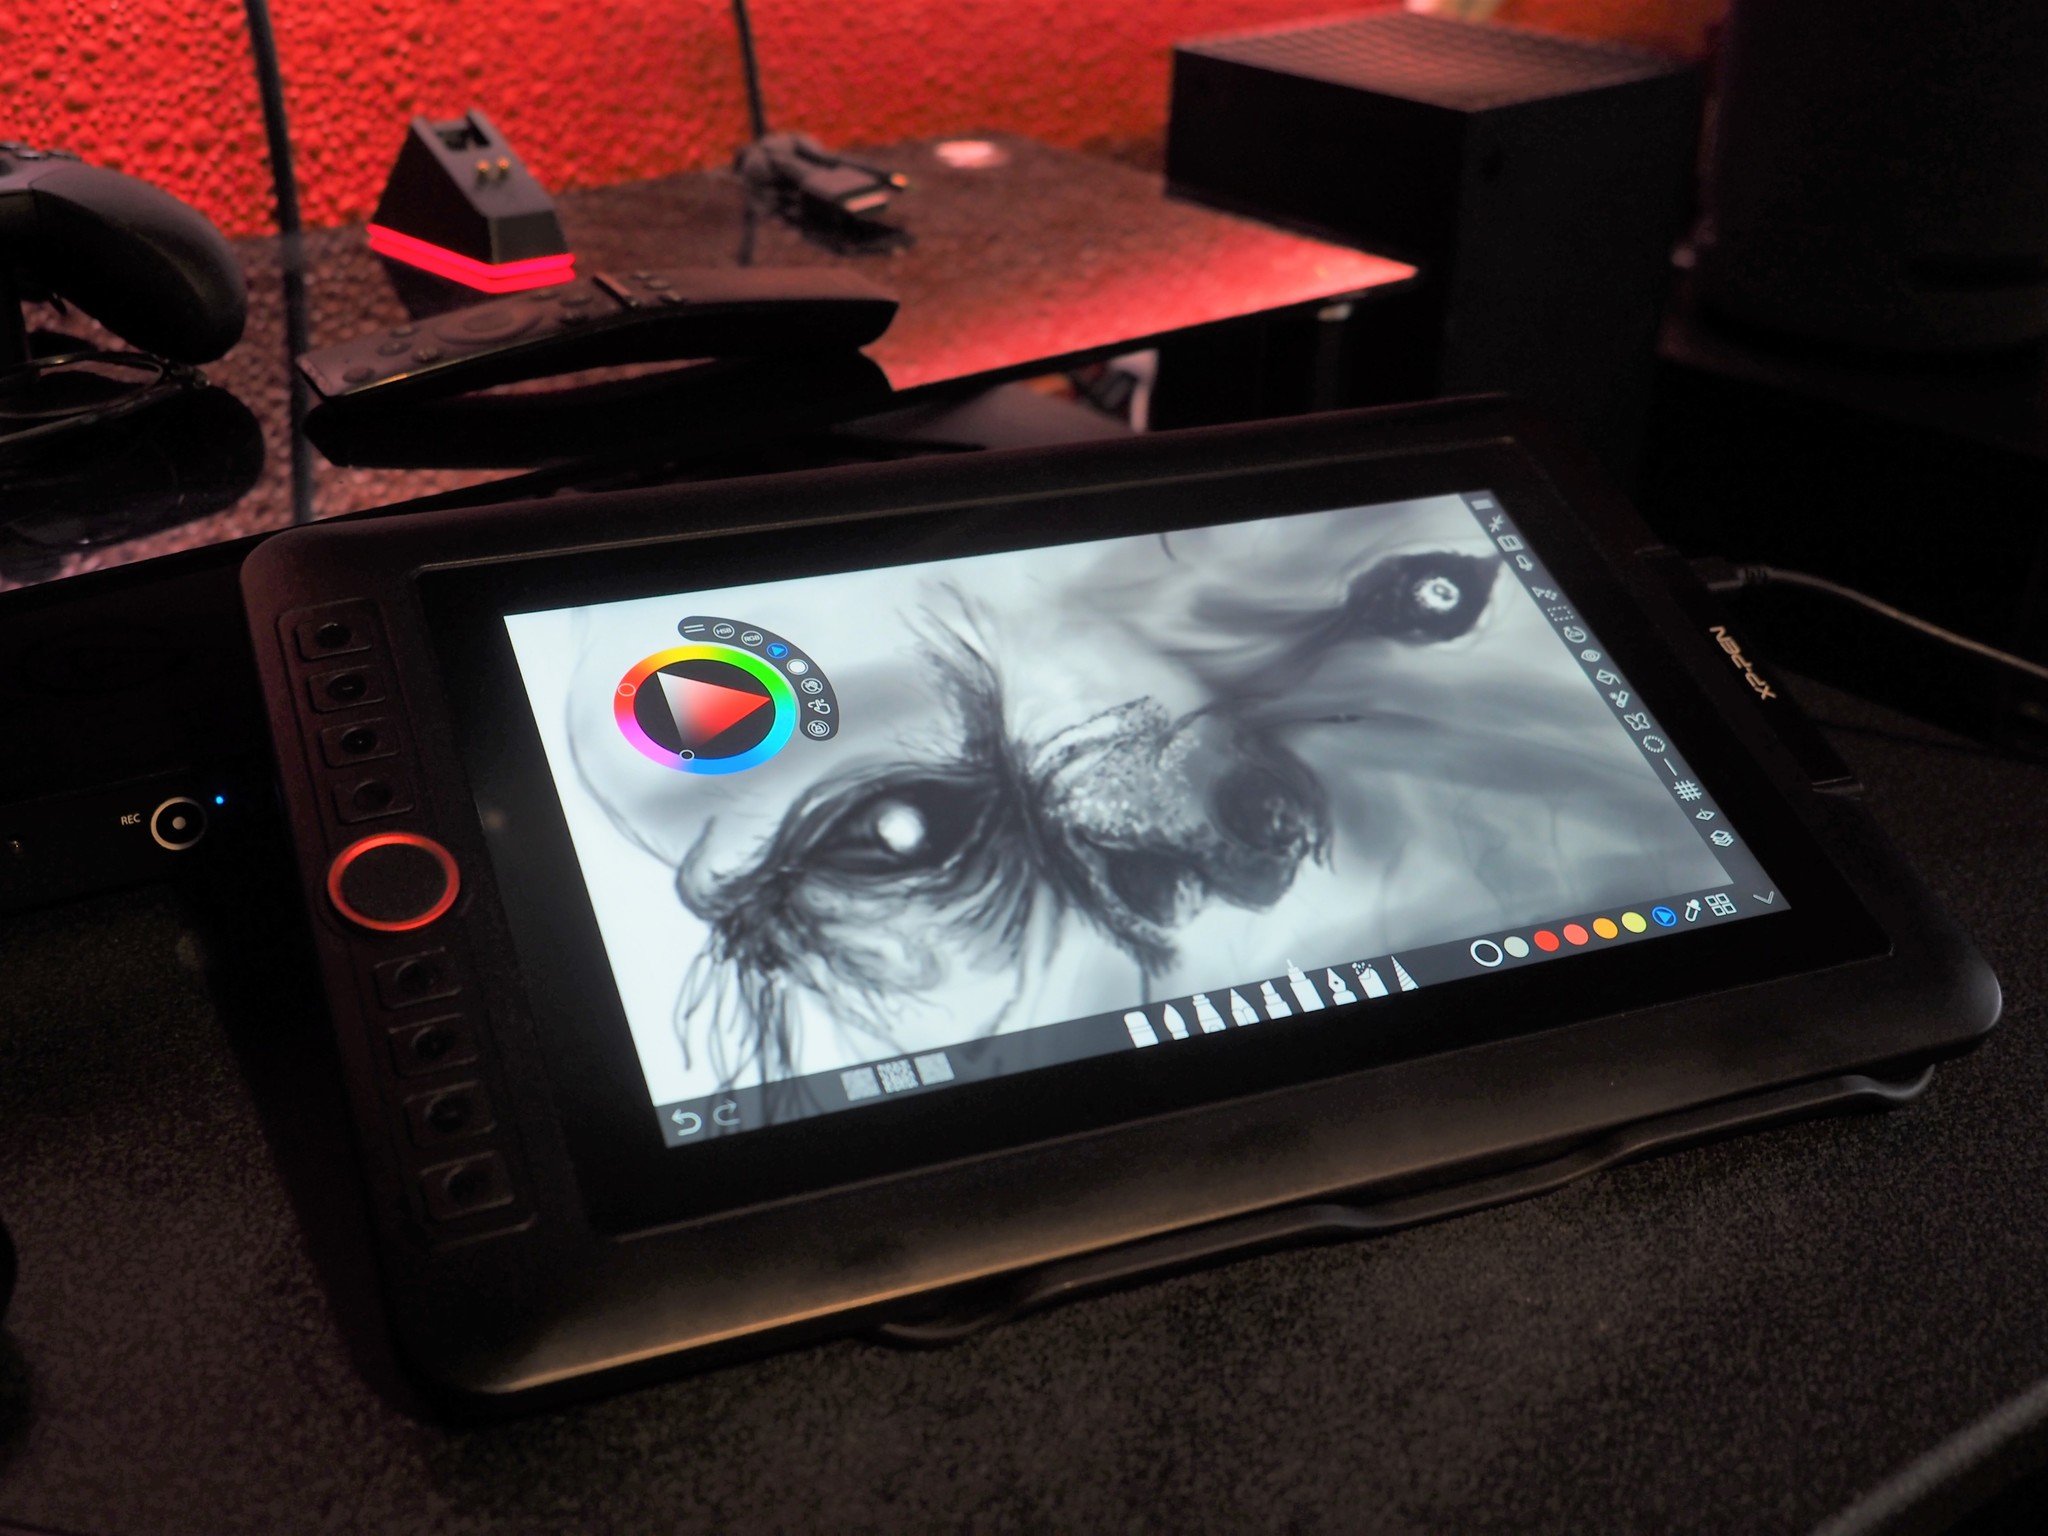 XP Pen Artist 13.3 Pro review: A great drawing tablet for hobbyists and